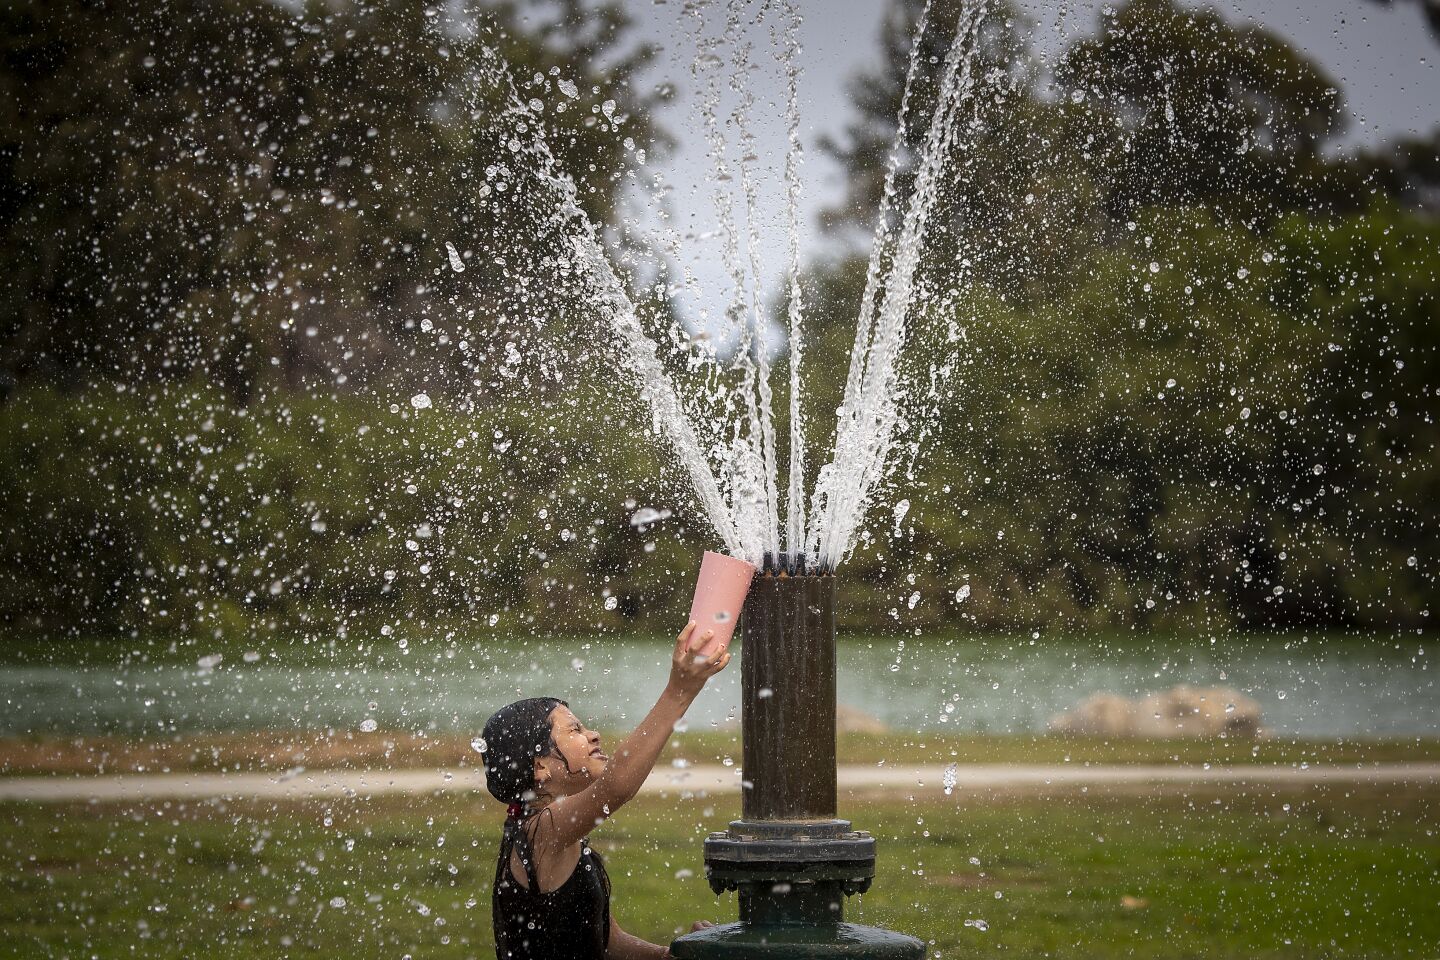 Laura Martinez, 8, of Santa Ana cools off at Mile Square Park in Fountain Valley.